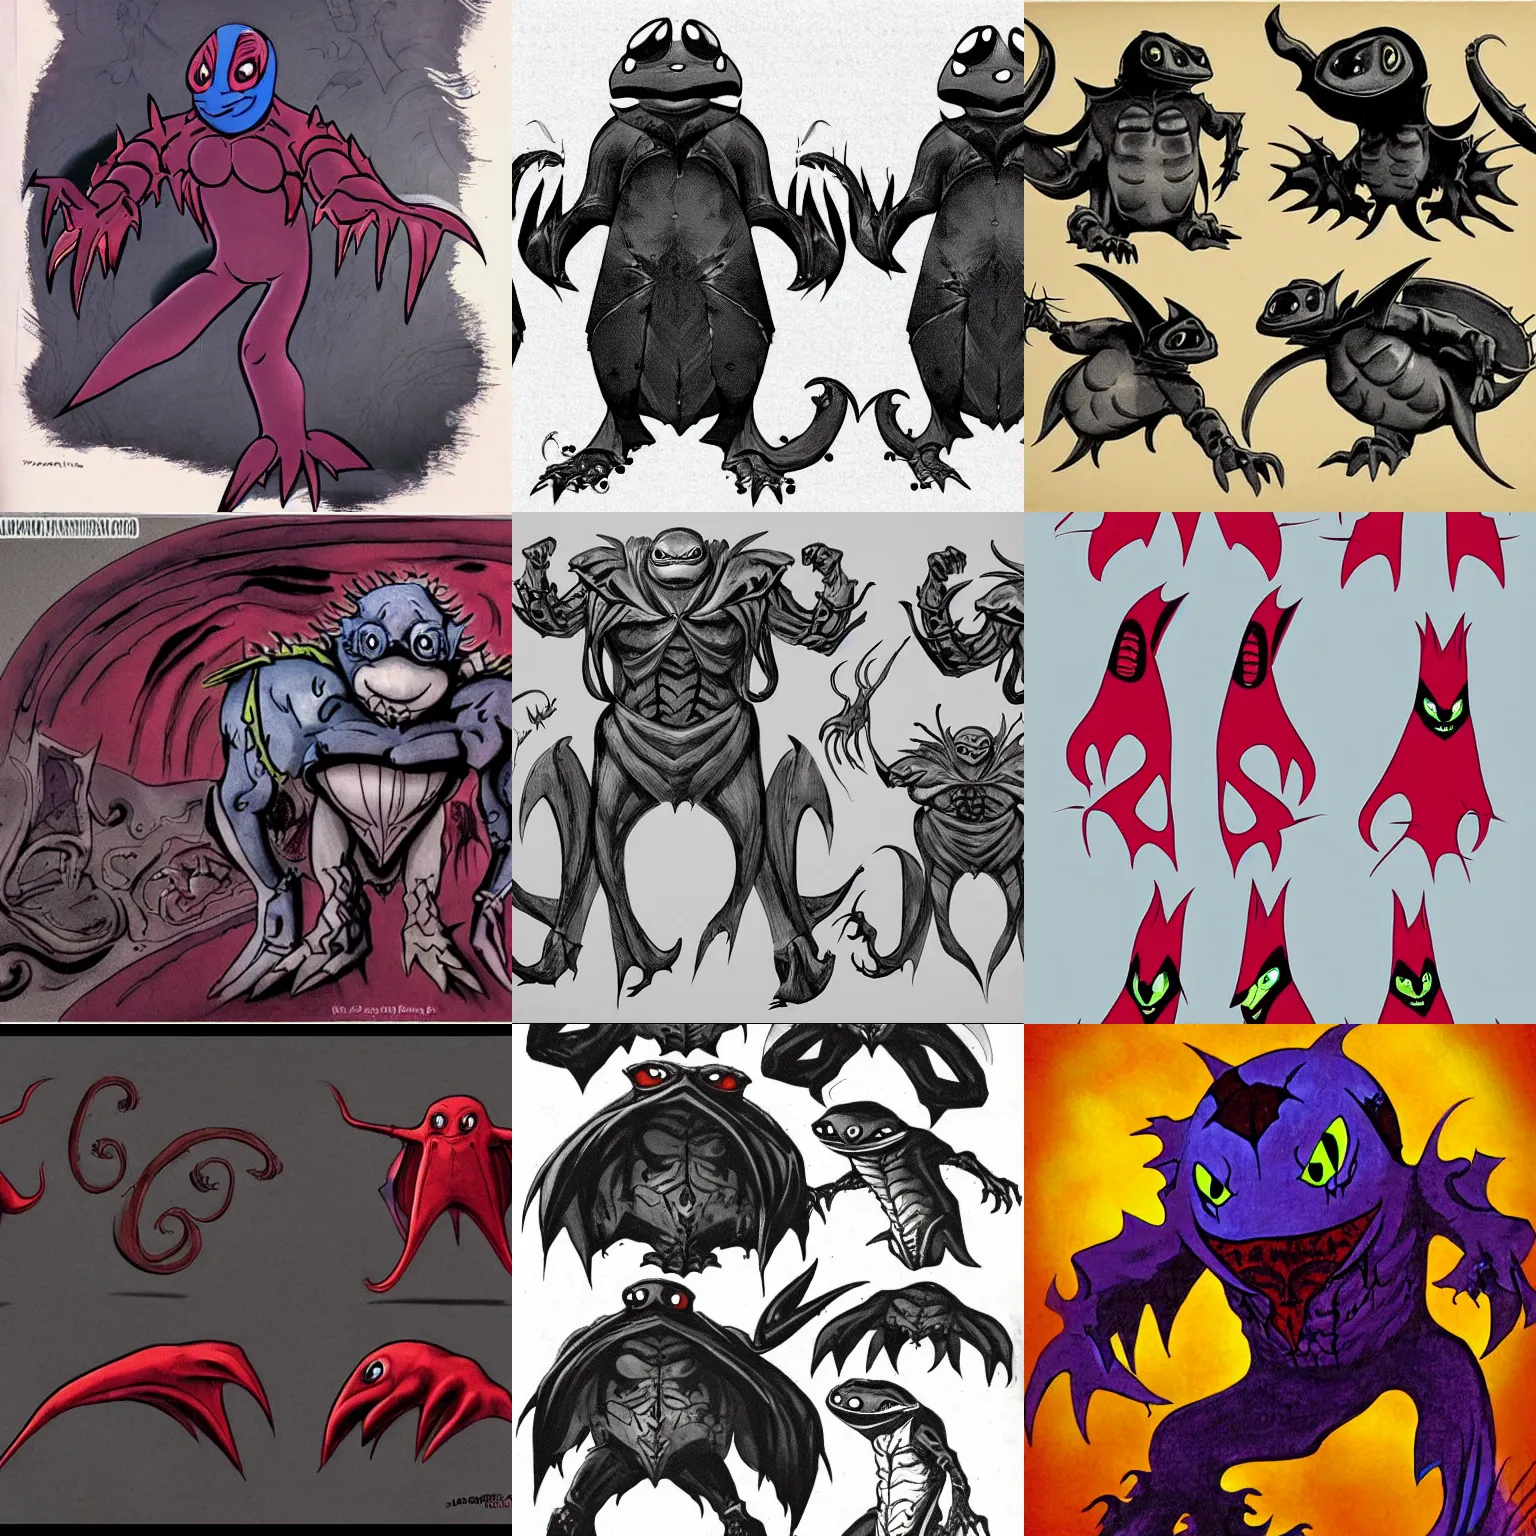 Prompt: designs for a gothic vampire squid from the rise of the teenage mutant ninja turtles cartoon on nickelodeon